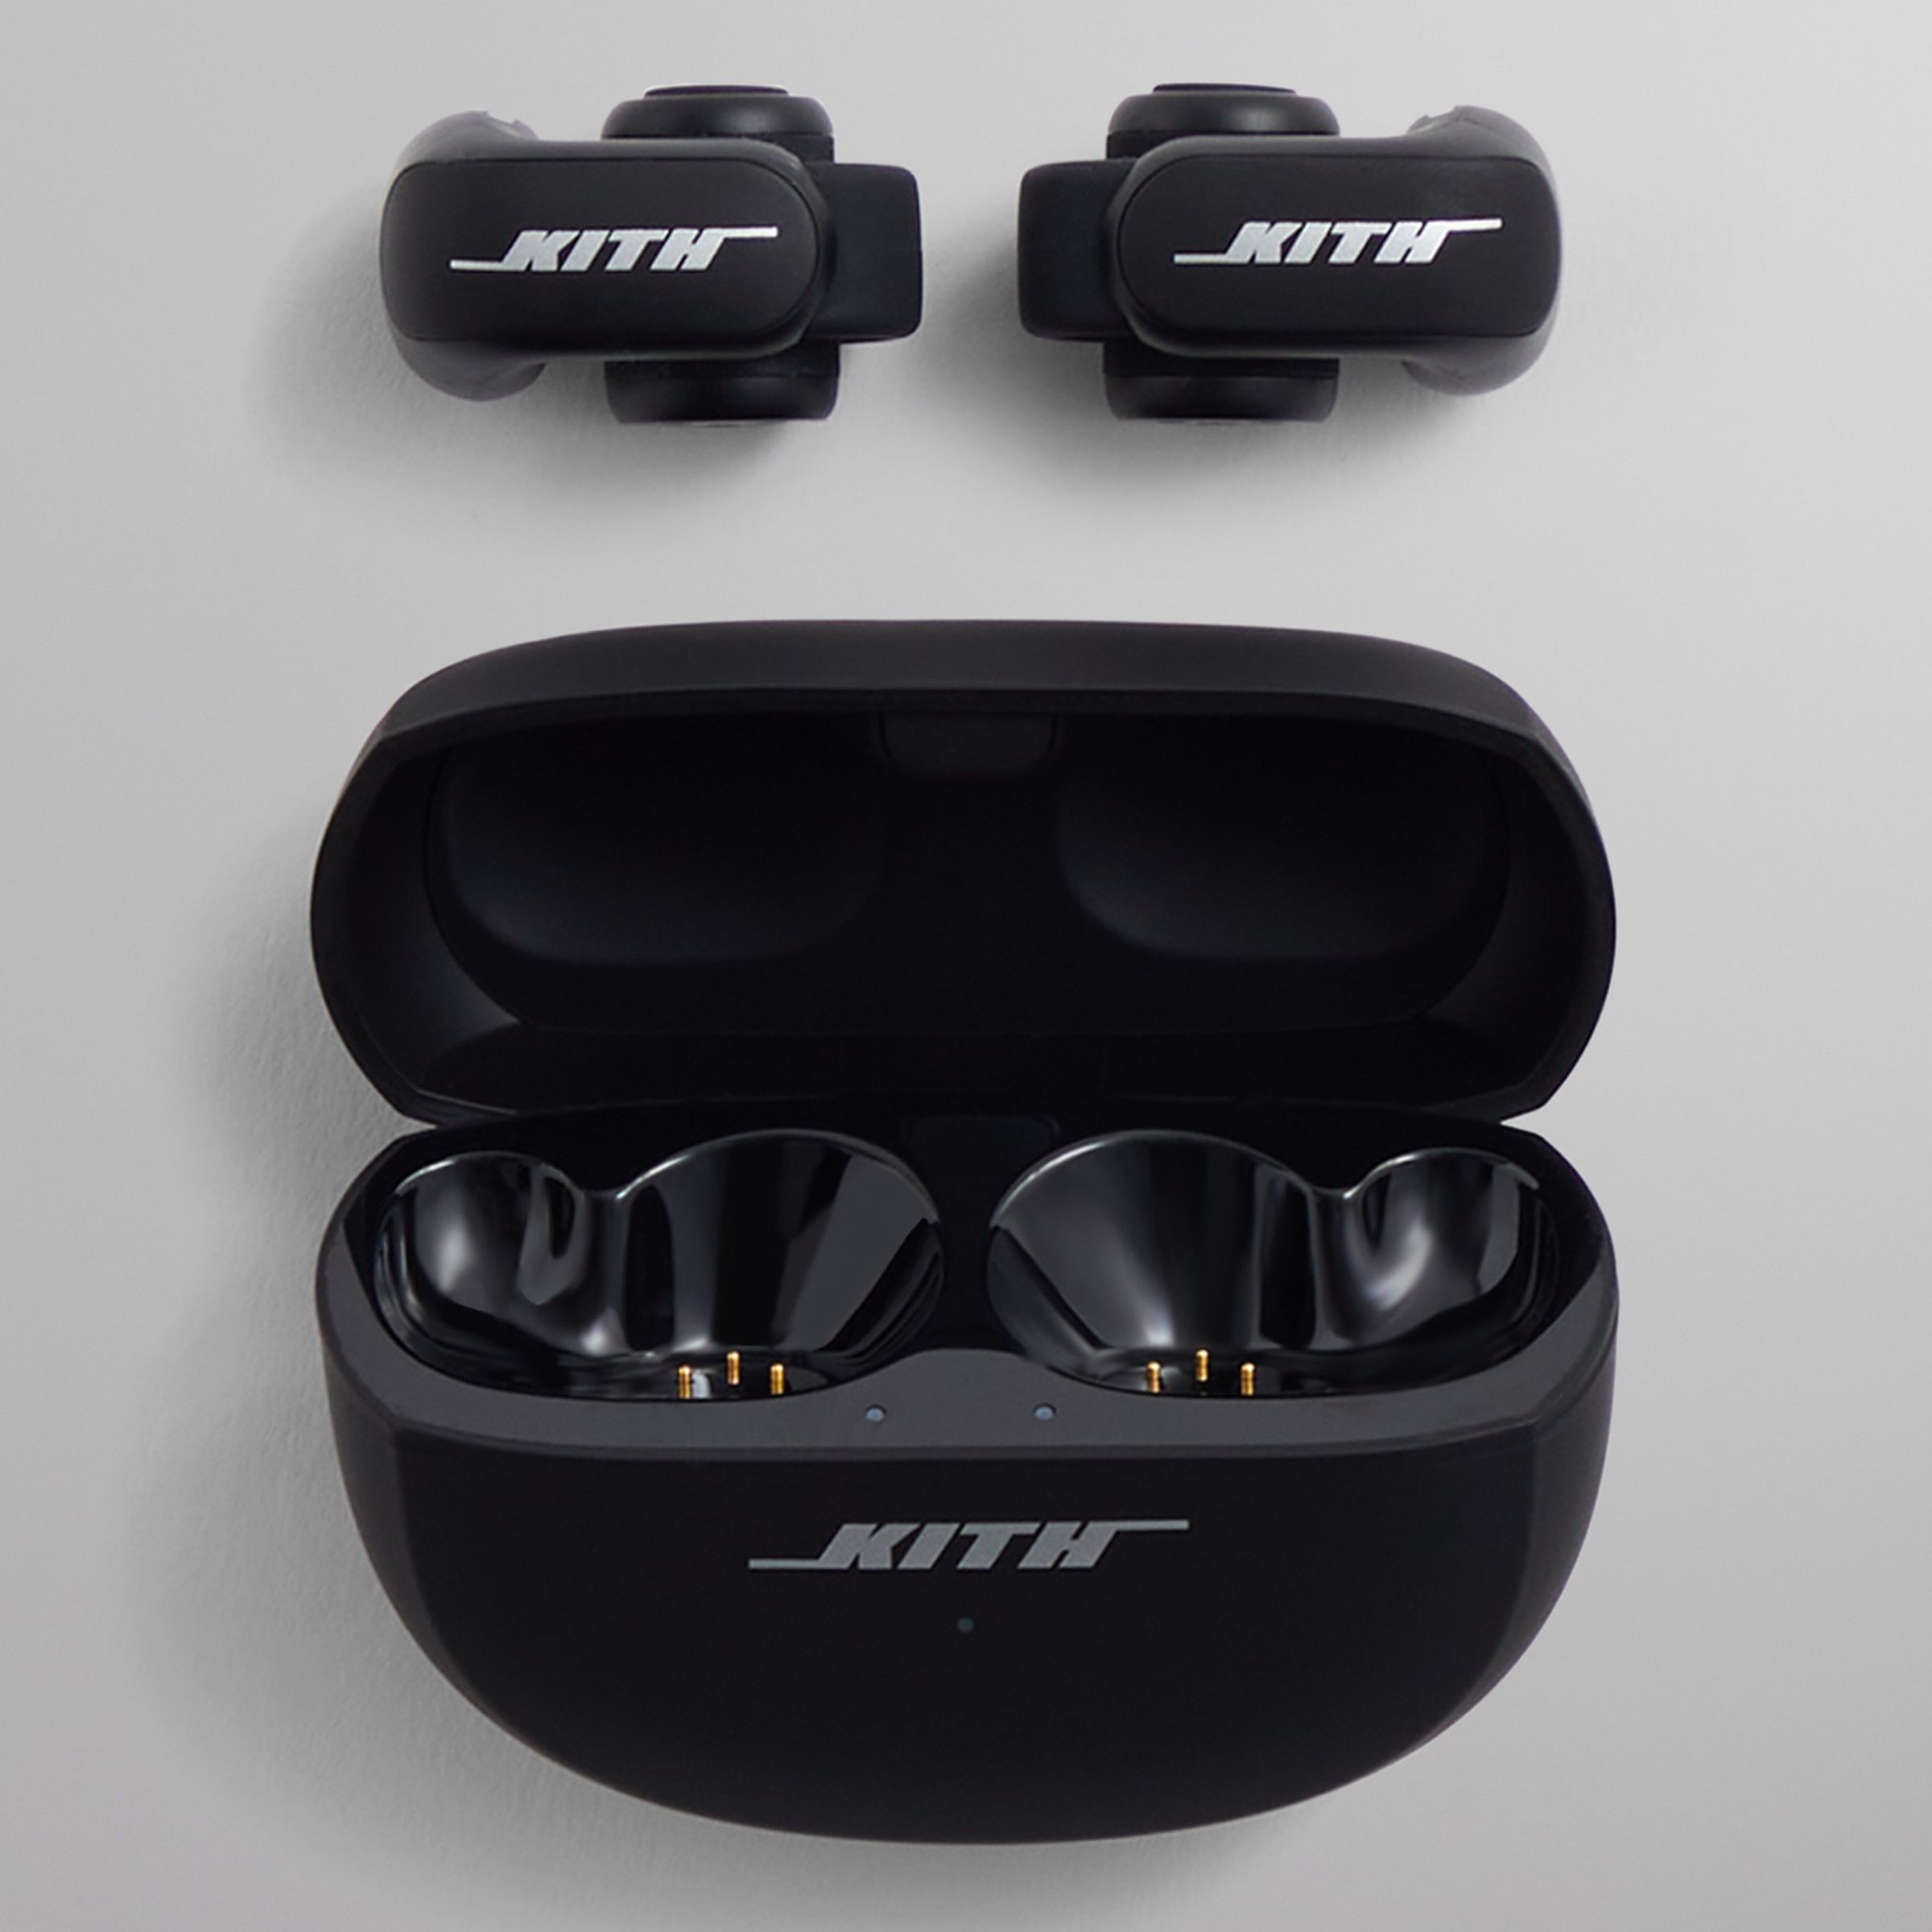 An image of the Bose Ultra Open Earbuds.